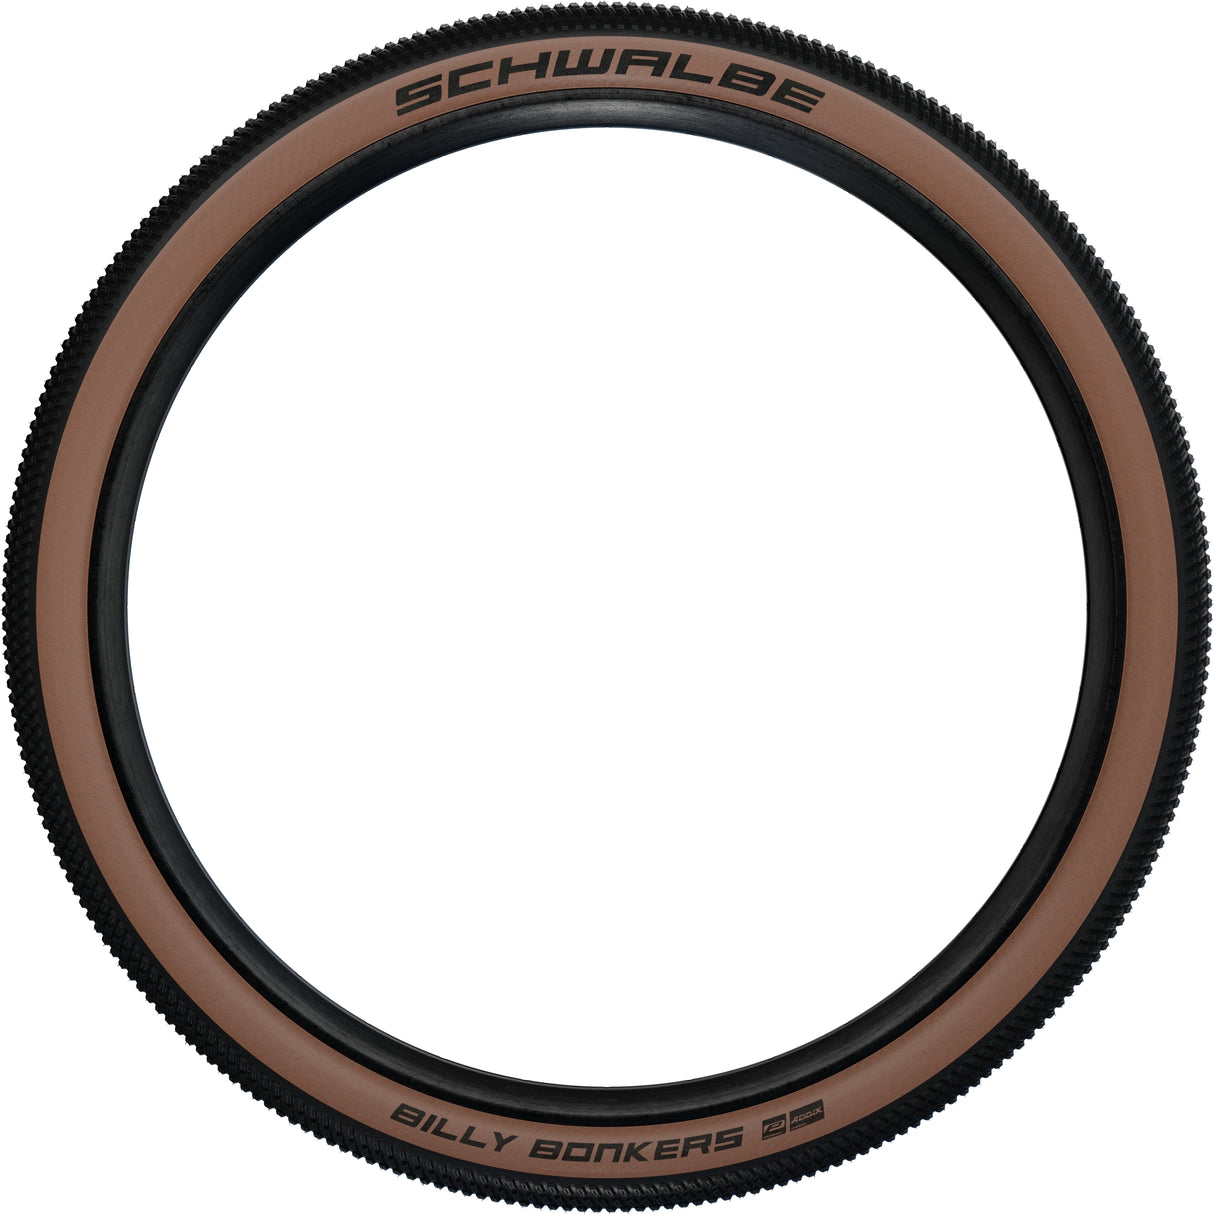 SCHWALBE Billy Bonkers vouwband 20x2.00" Performance